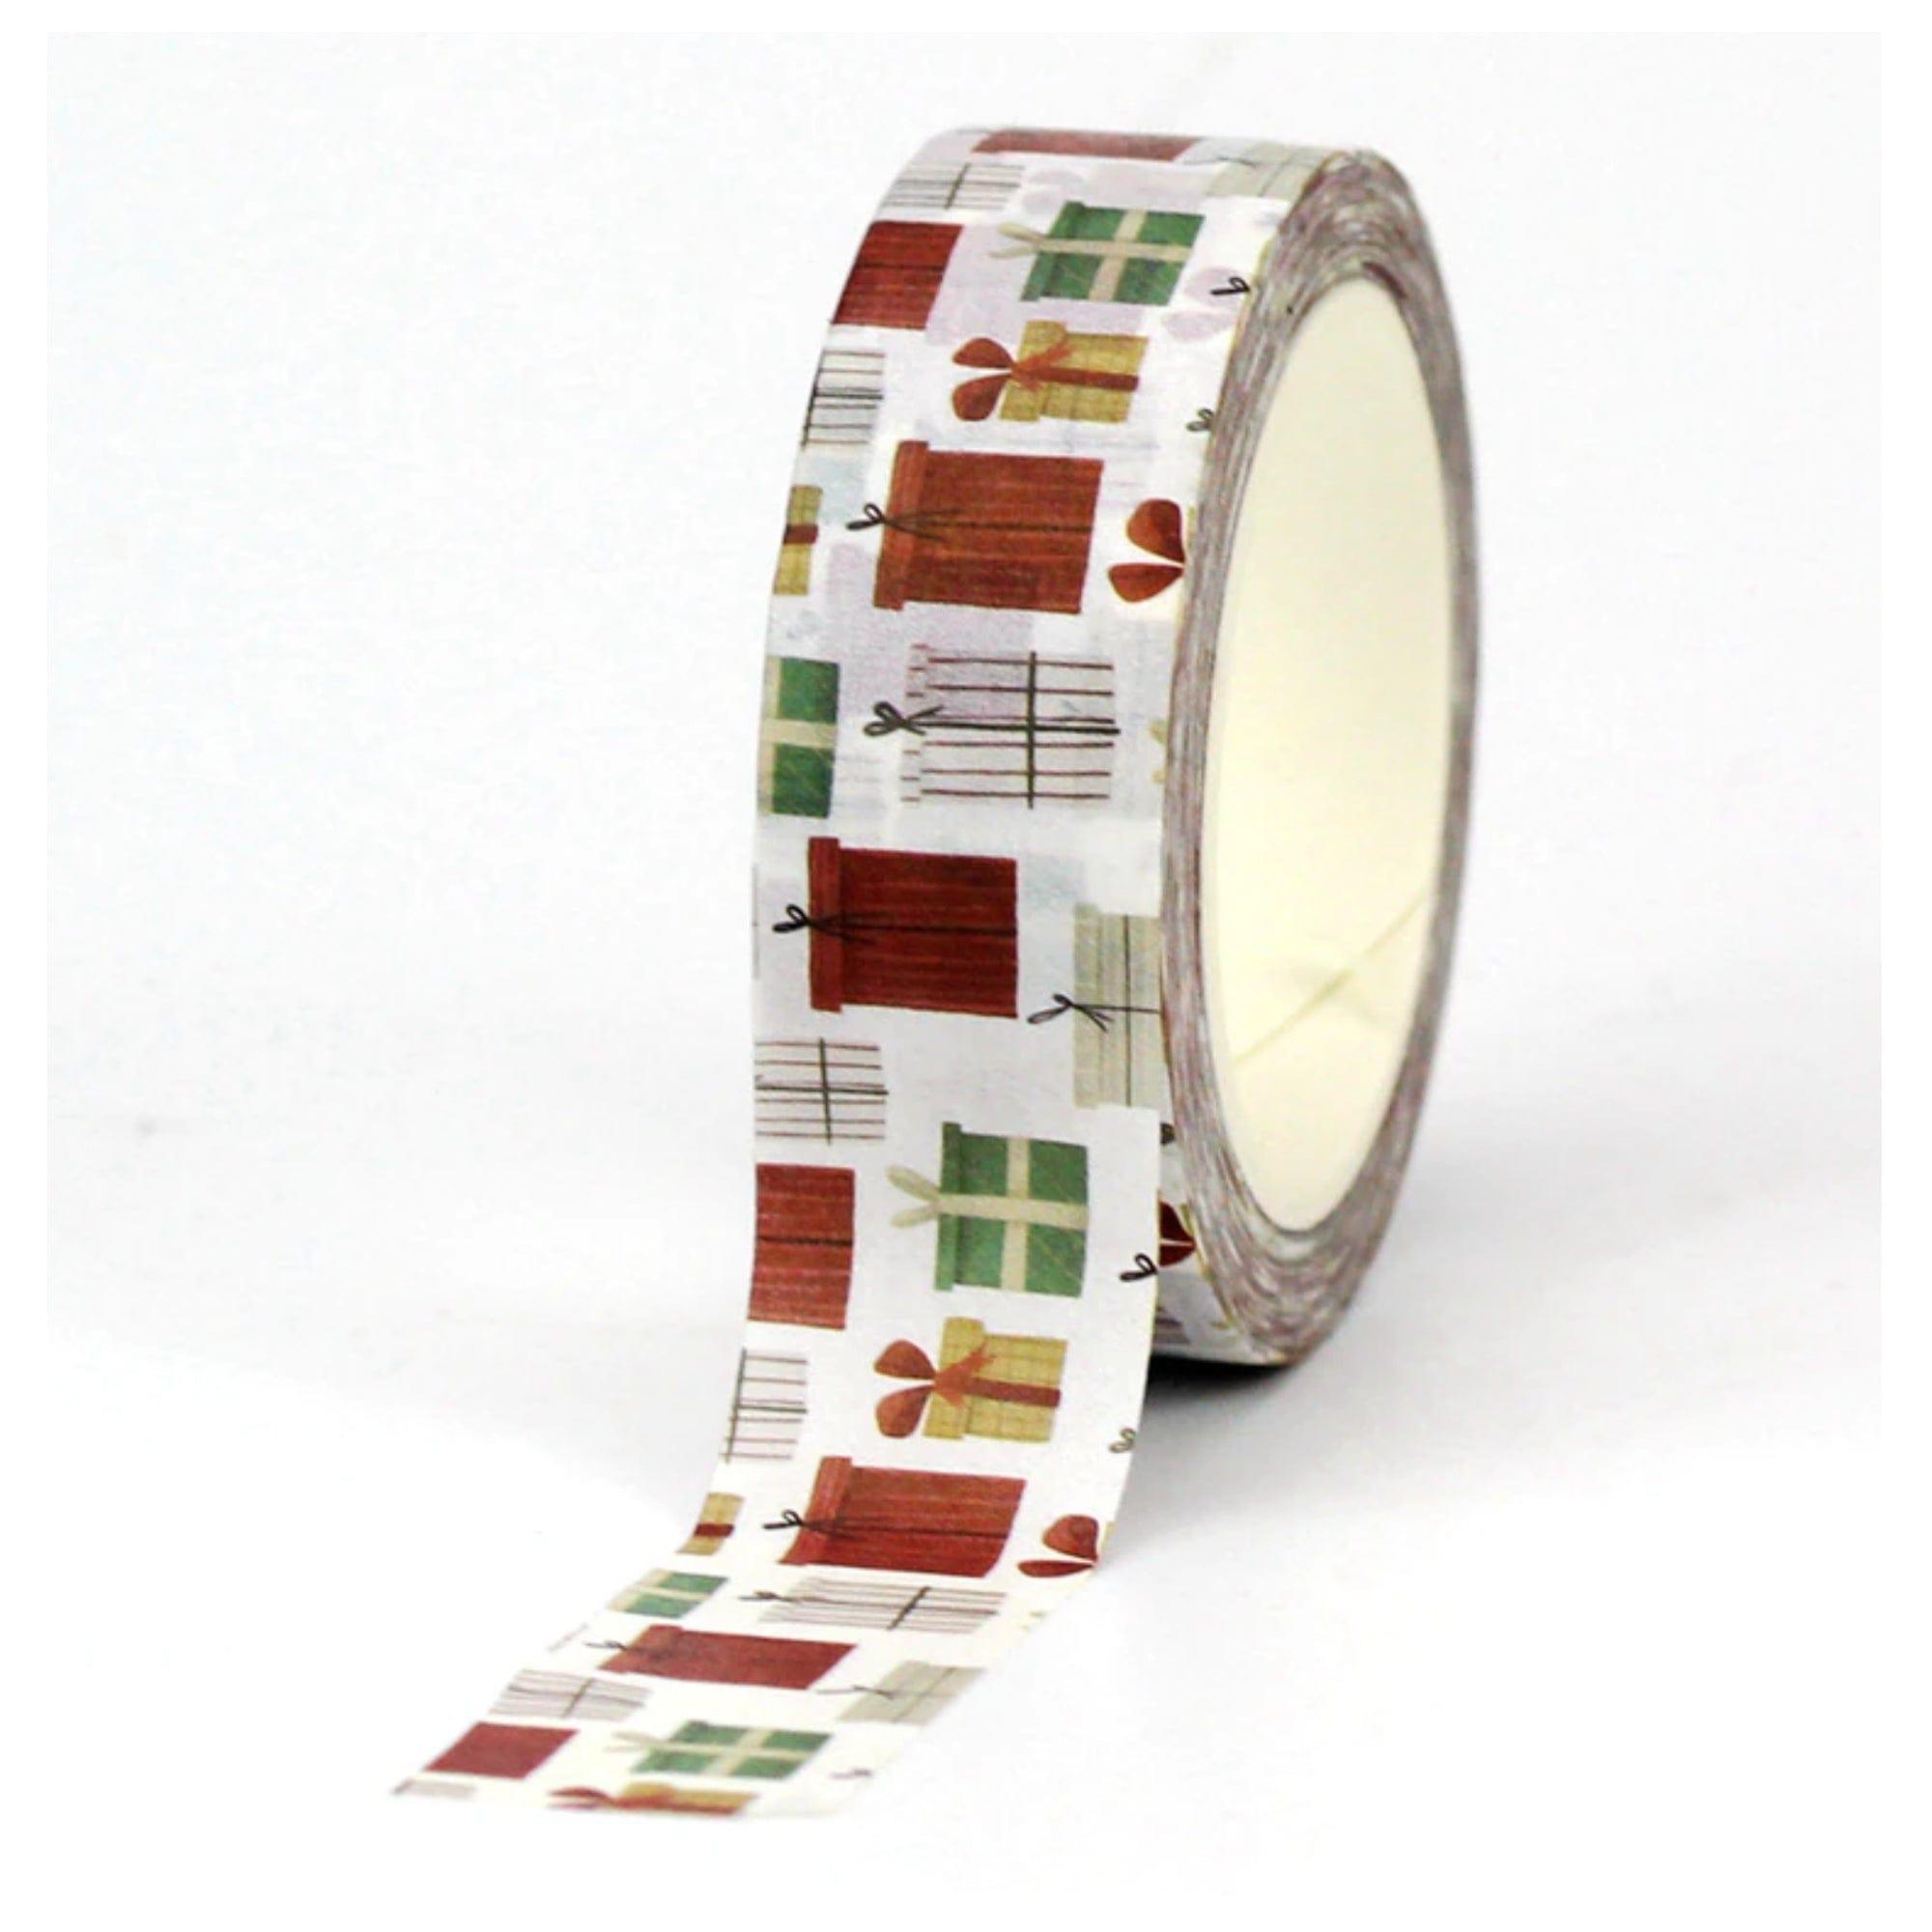 TW Collection Christmas Presents Washi Tape by SSC Designs - 15mm x 30 Feet